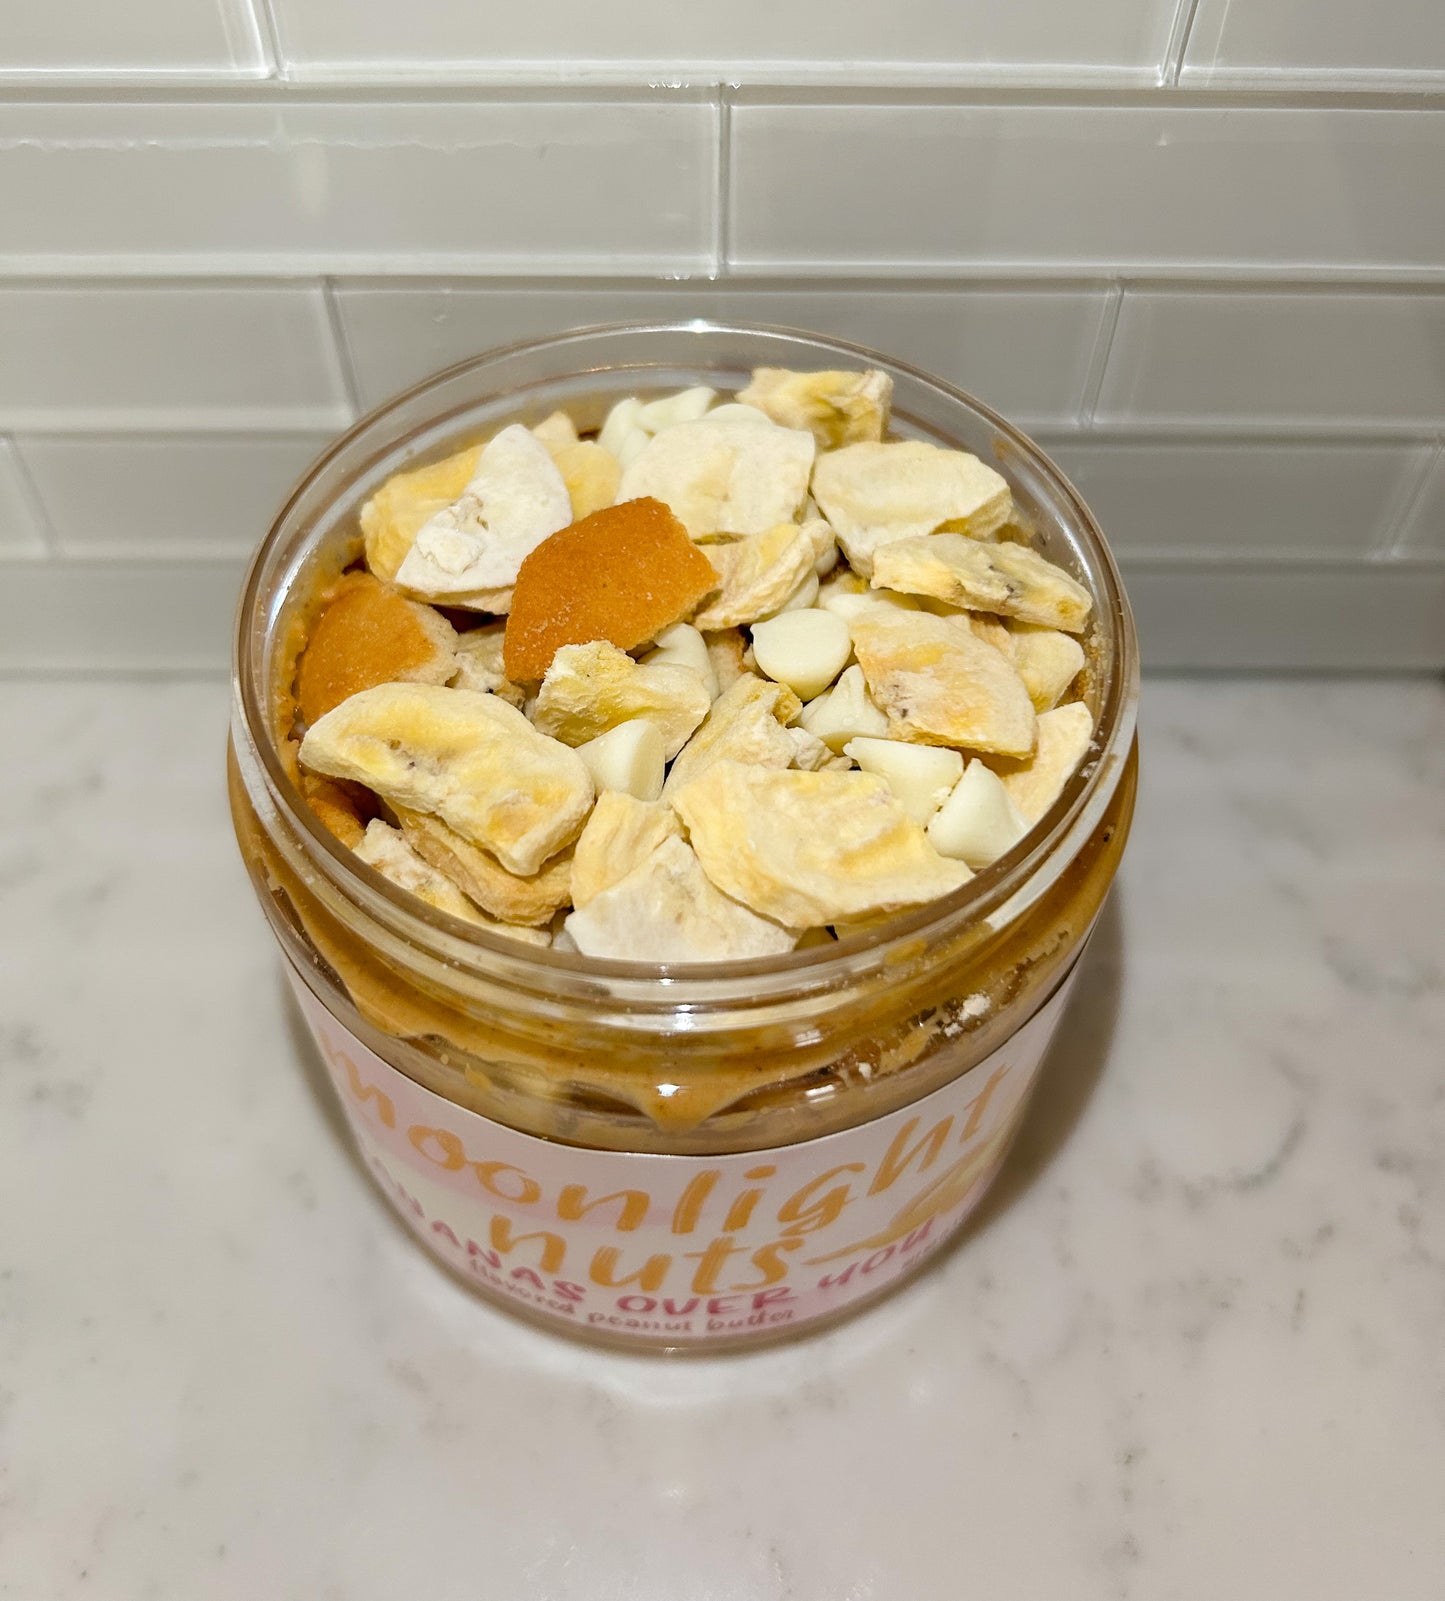 Bananas Over You- Flavored Peanut Butter